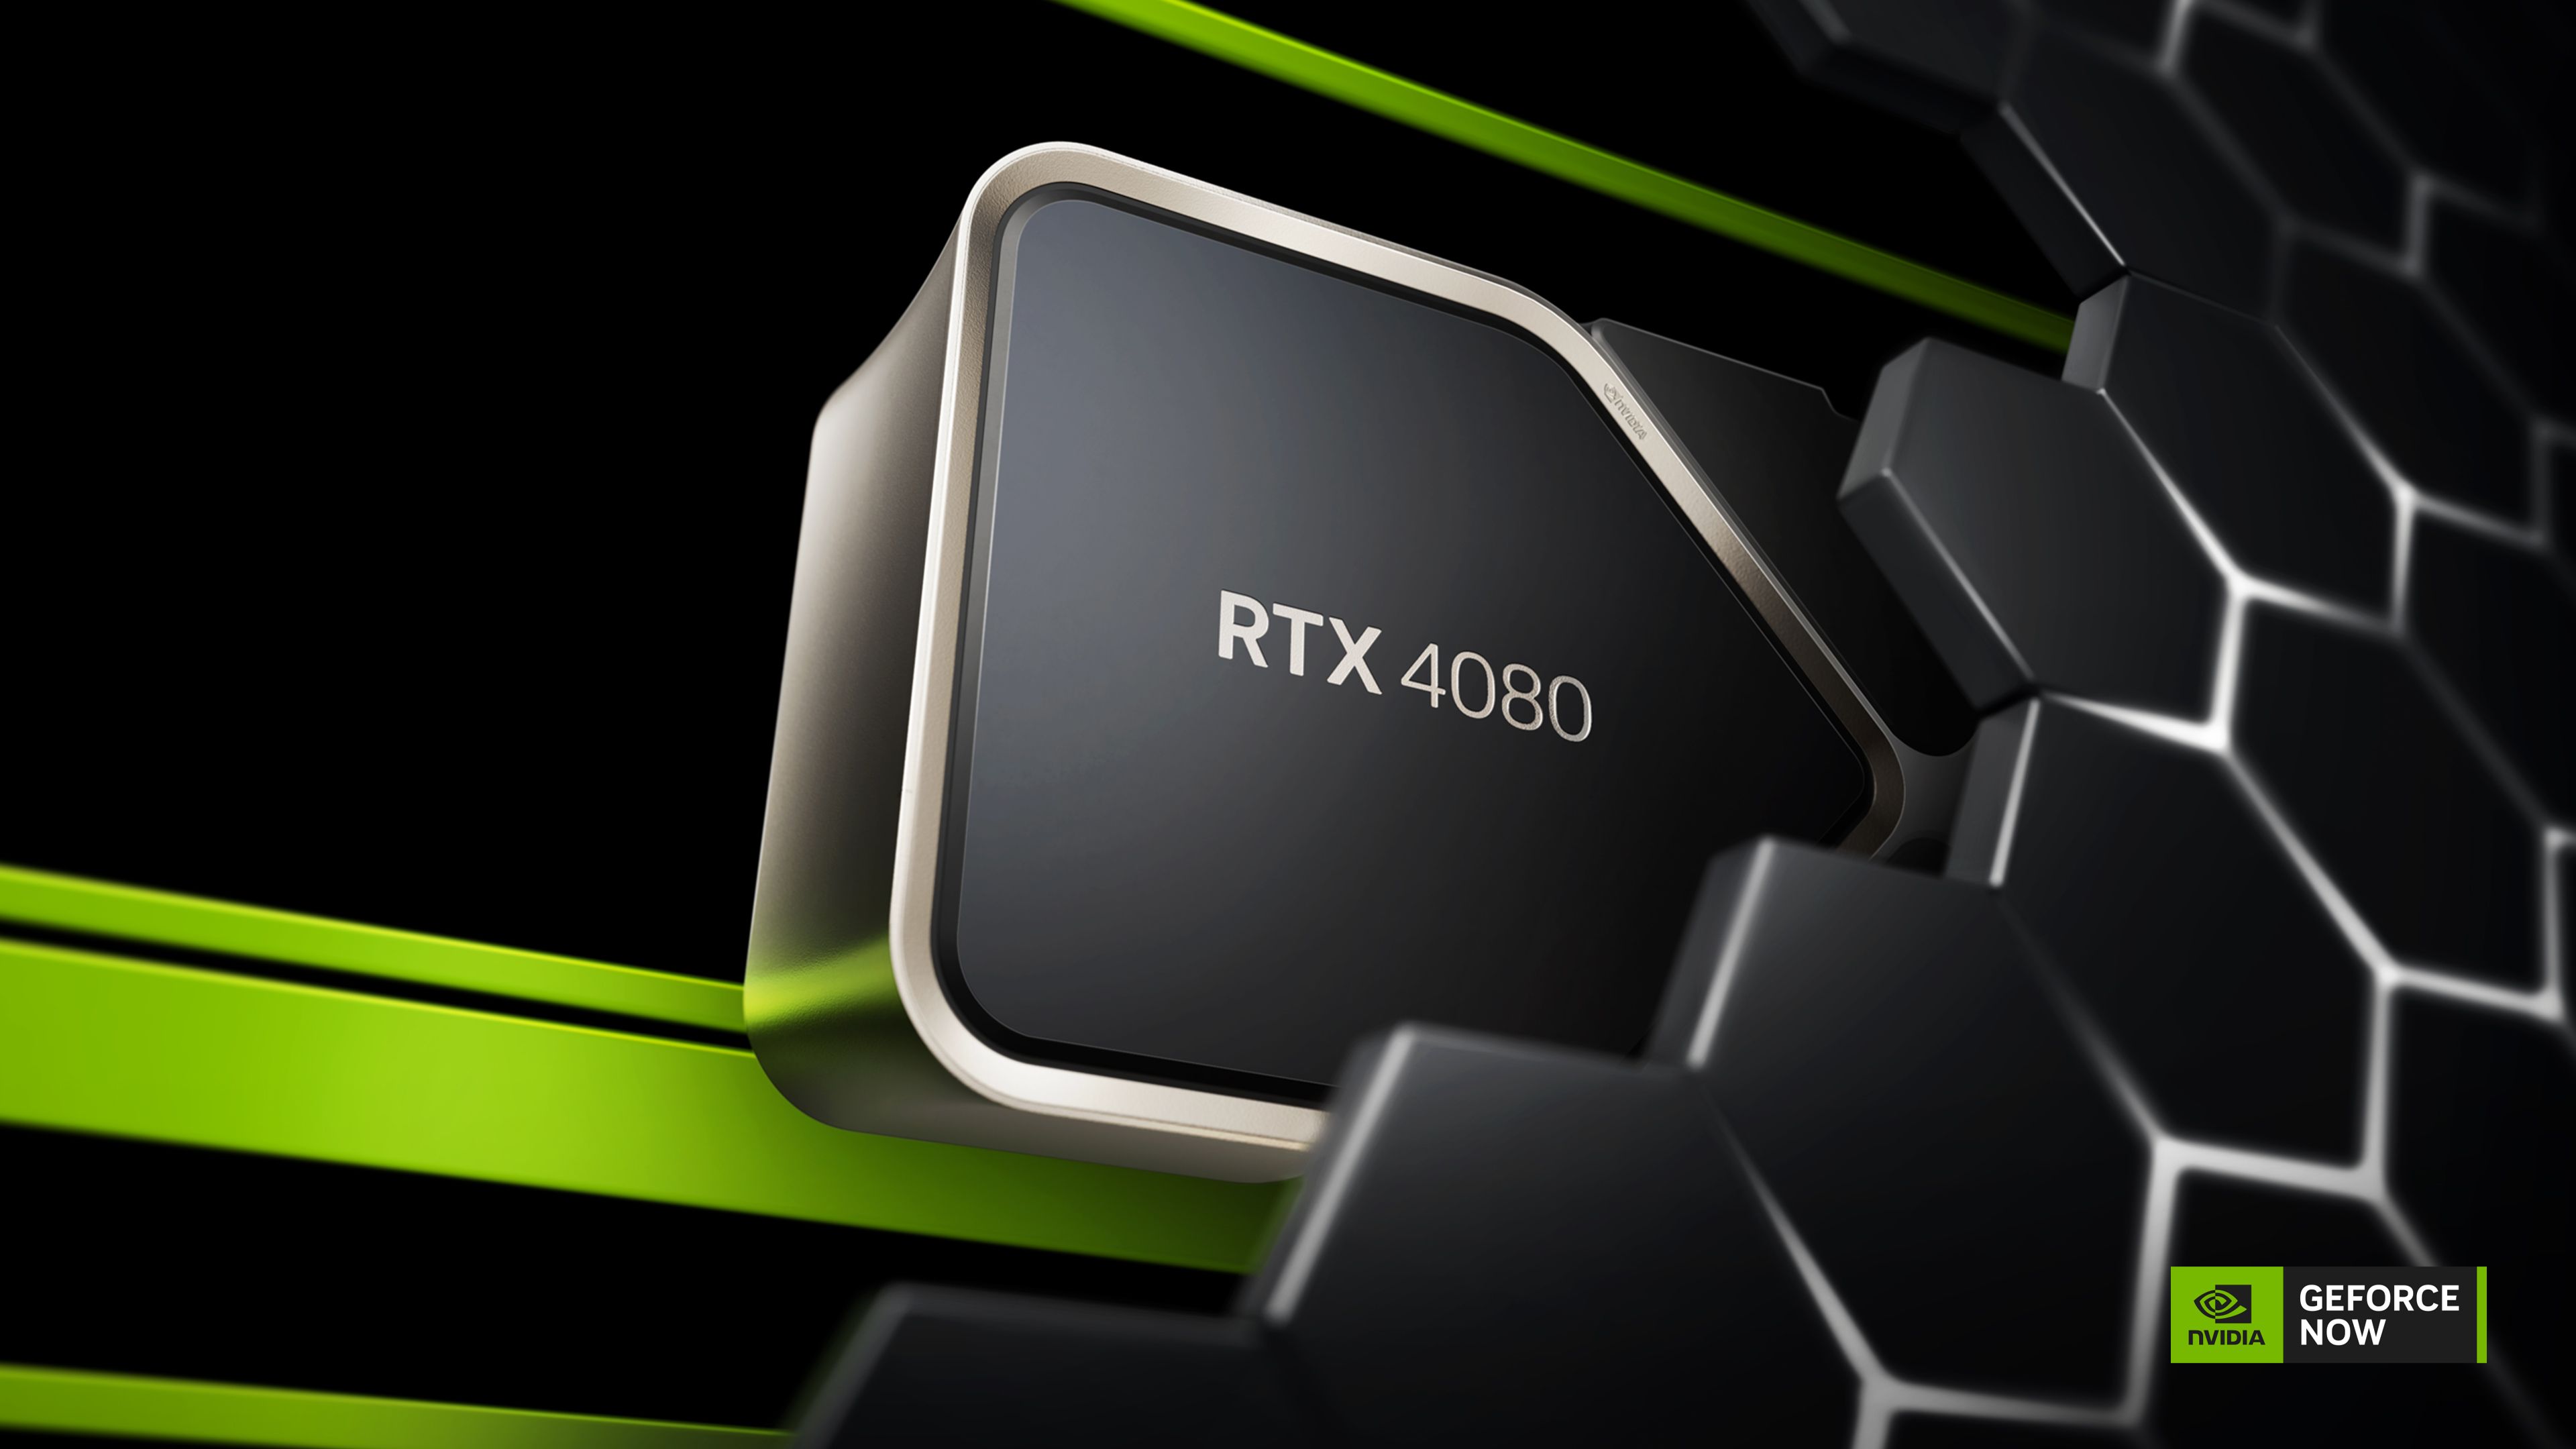 The GeForce NOW Ultimate membership with new RTX 4080.